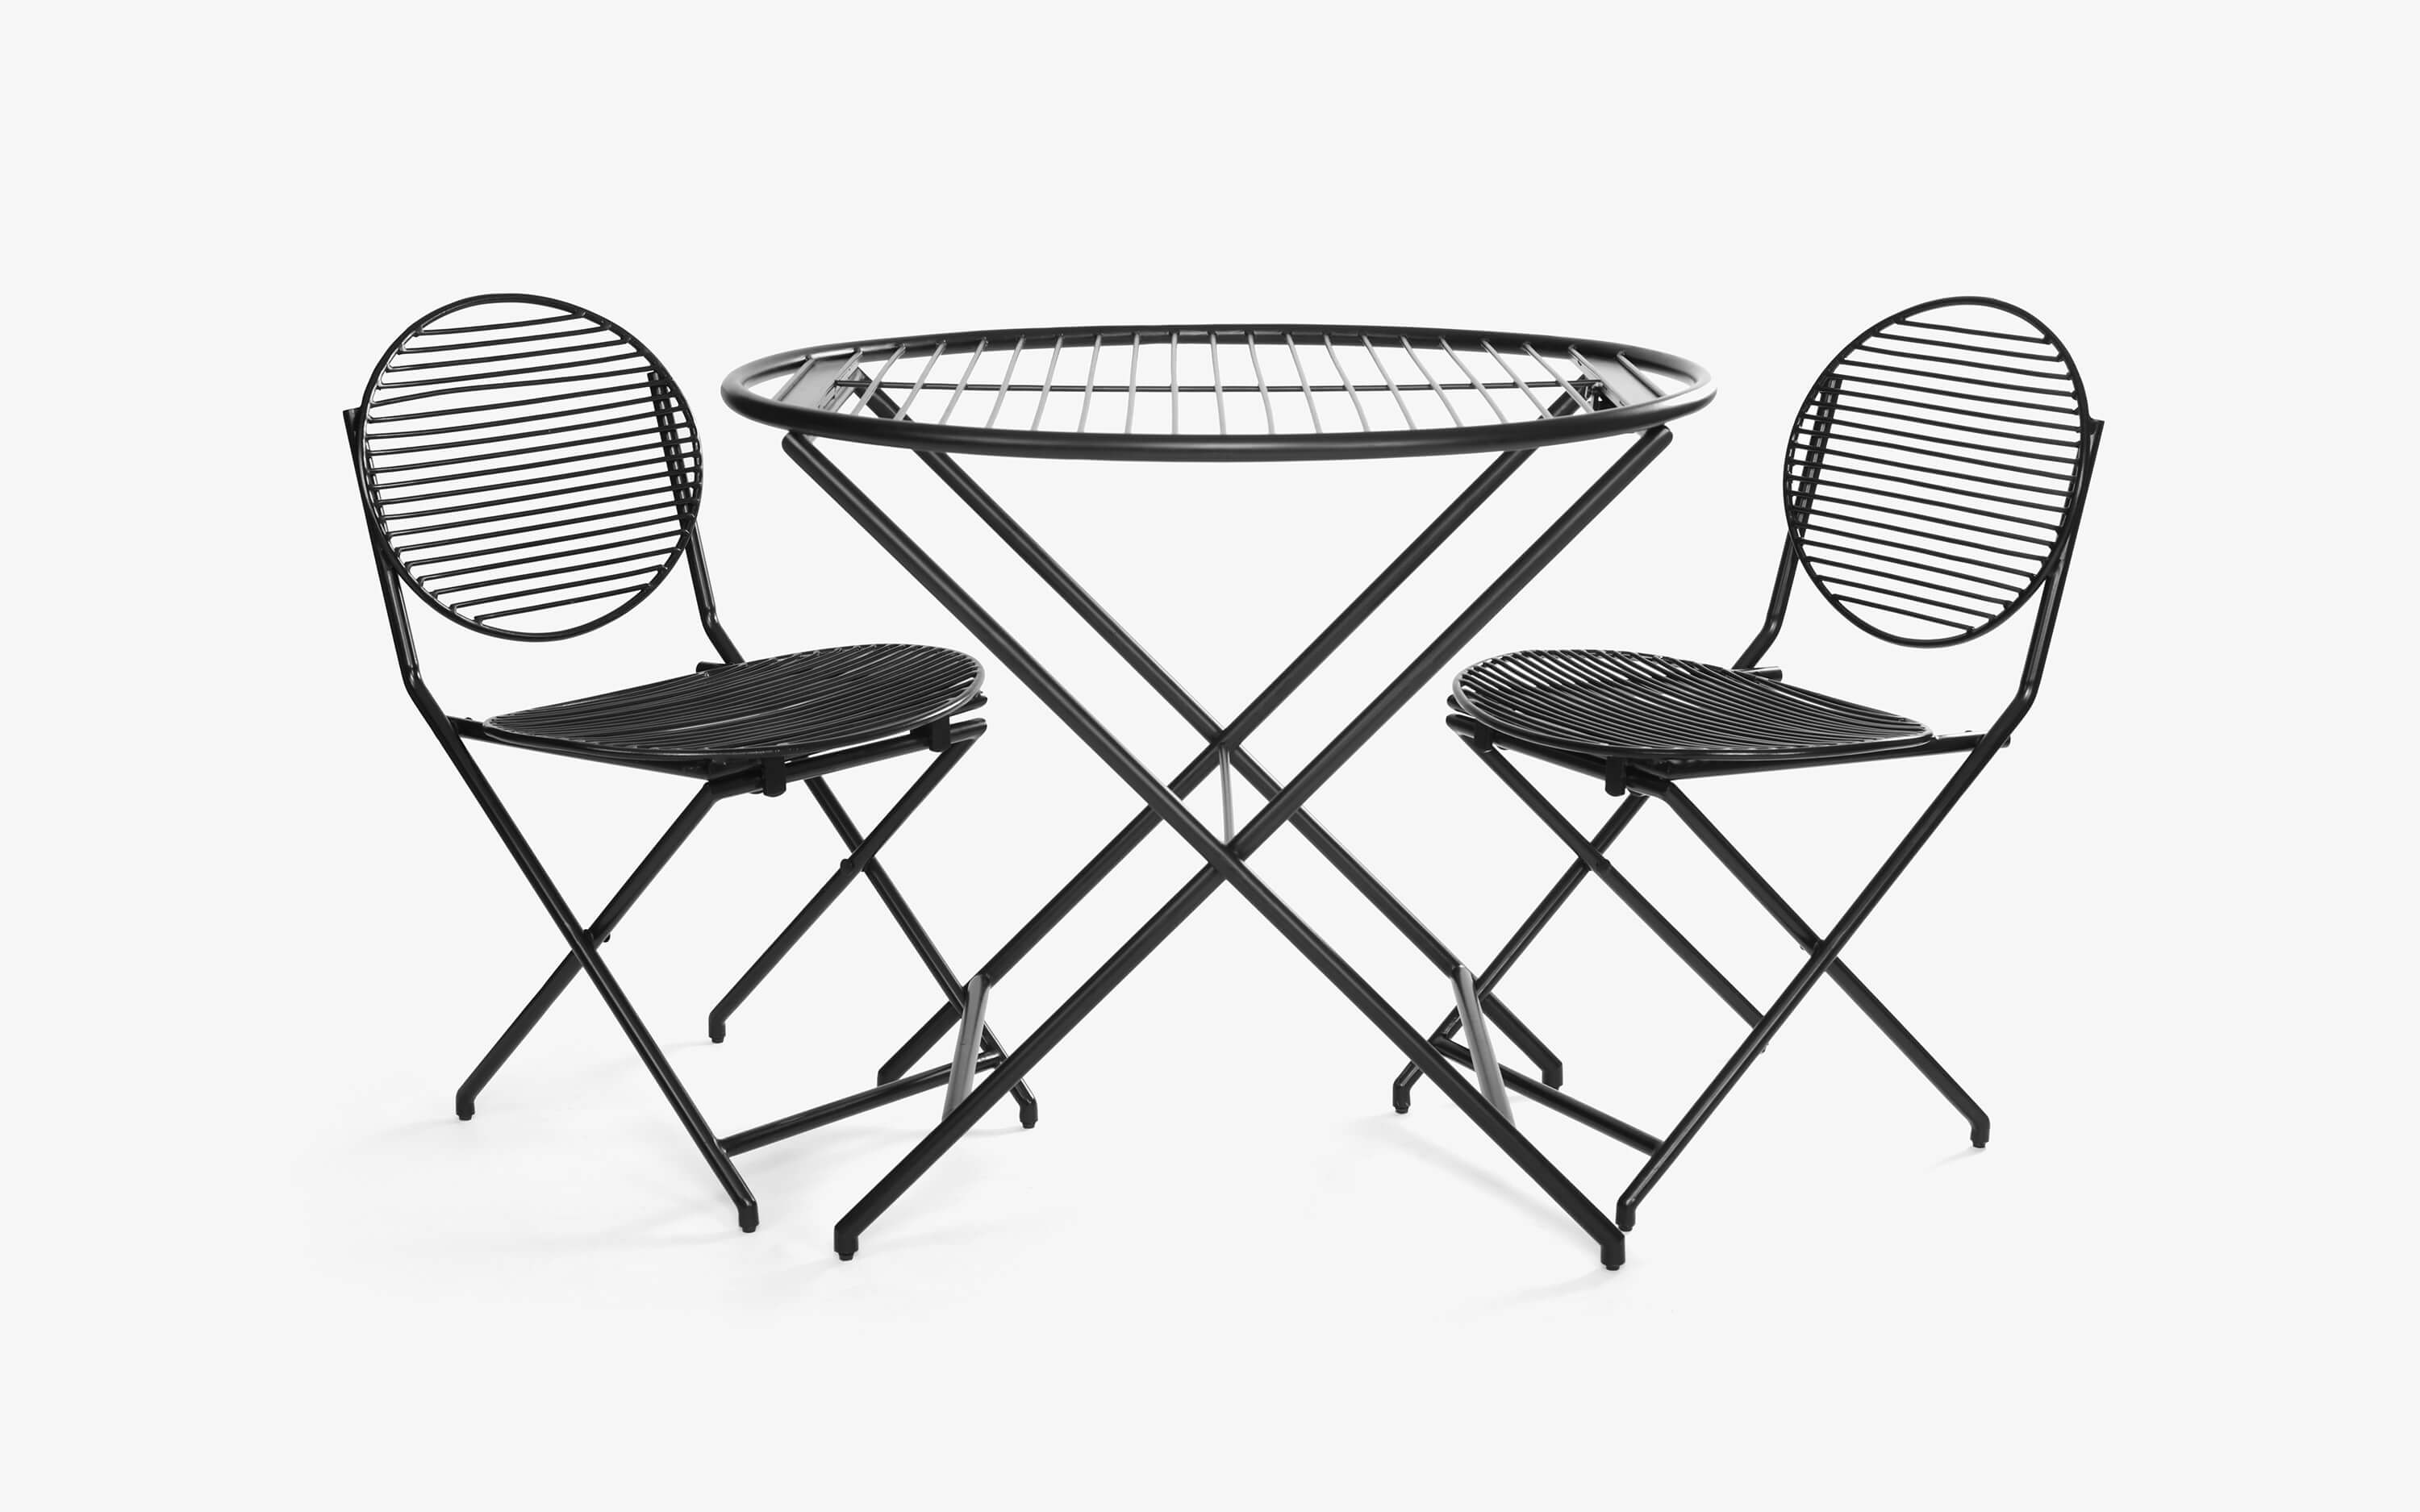 patio table and chairs. outdoor furniture. outdoor furniture near me. balcony furniture. patio furniture sets.